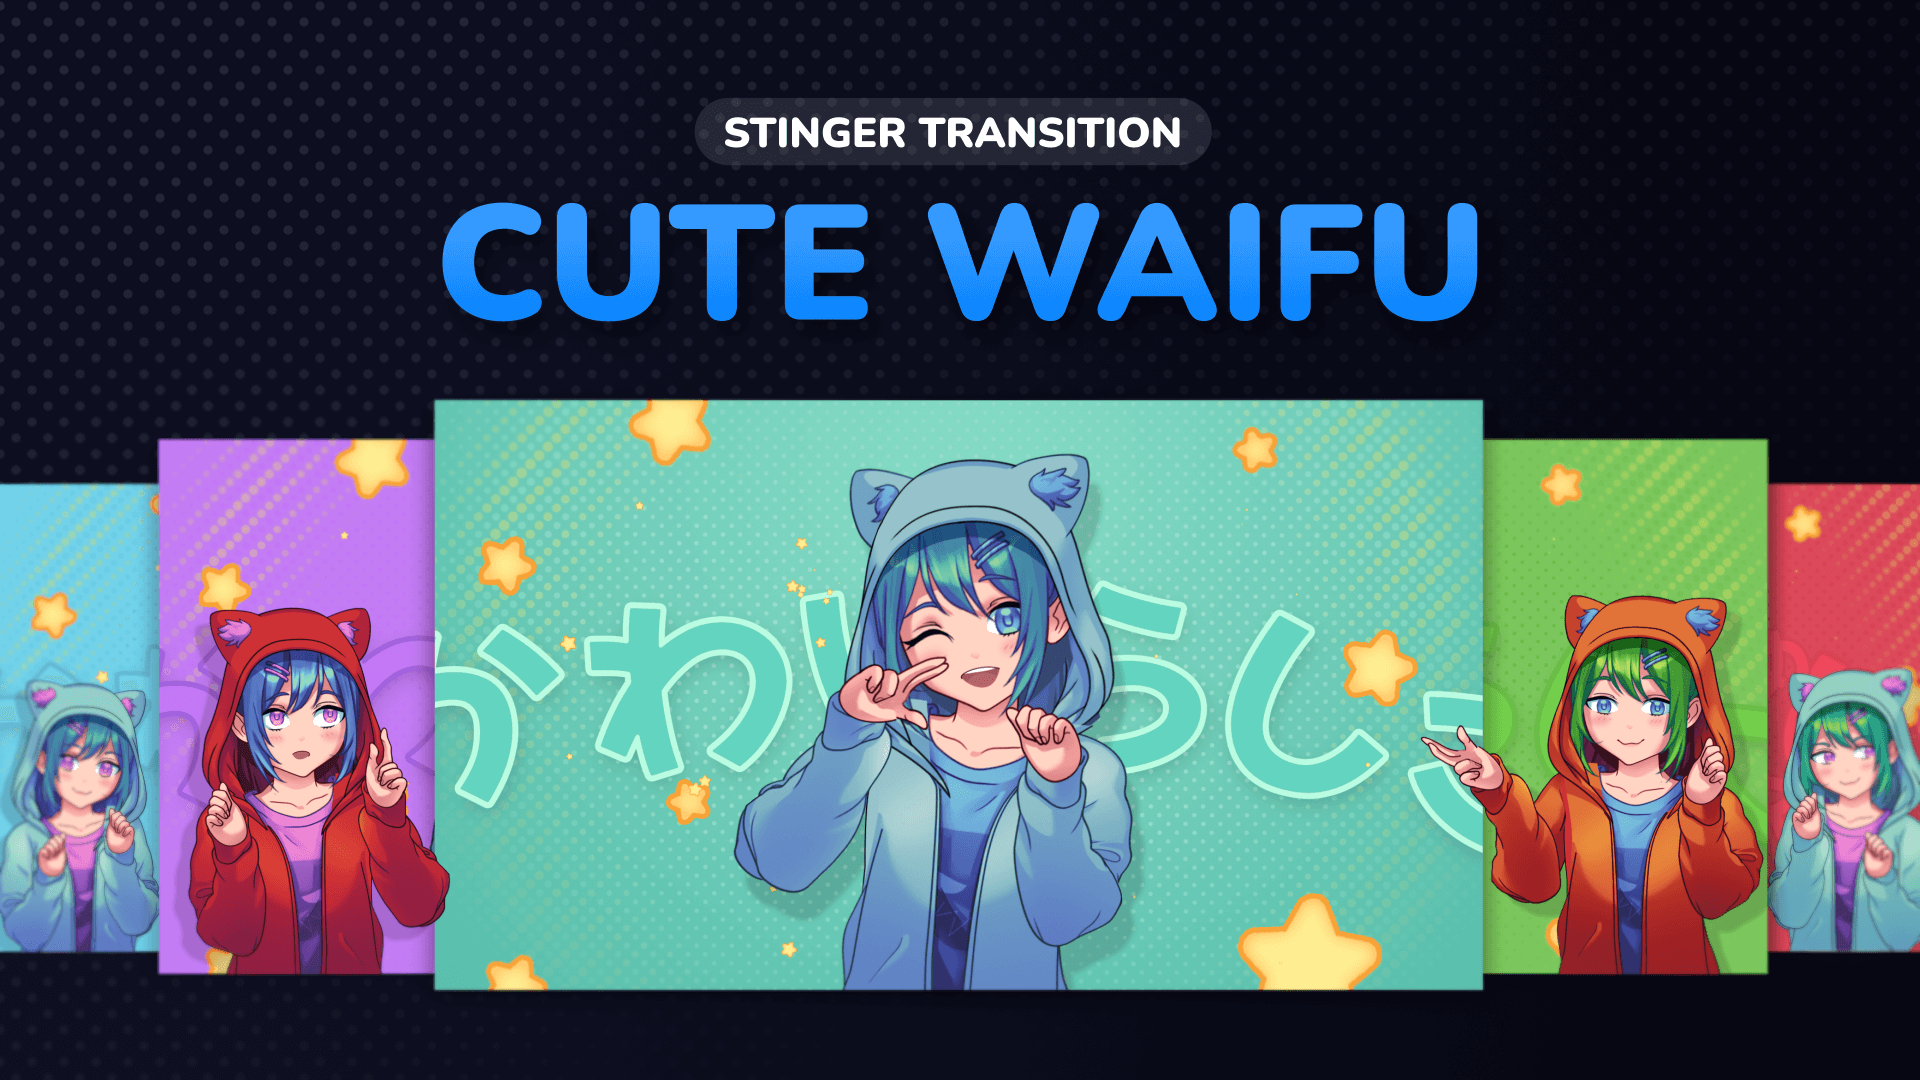 Cute Waifu - Stinger Transition for Twitch, Youtube and Facebook